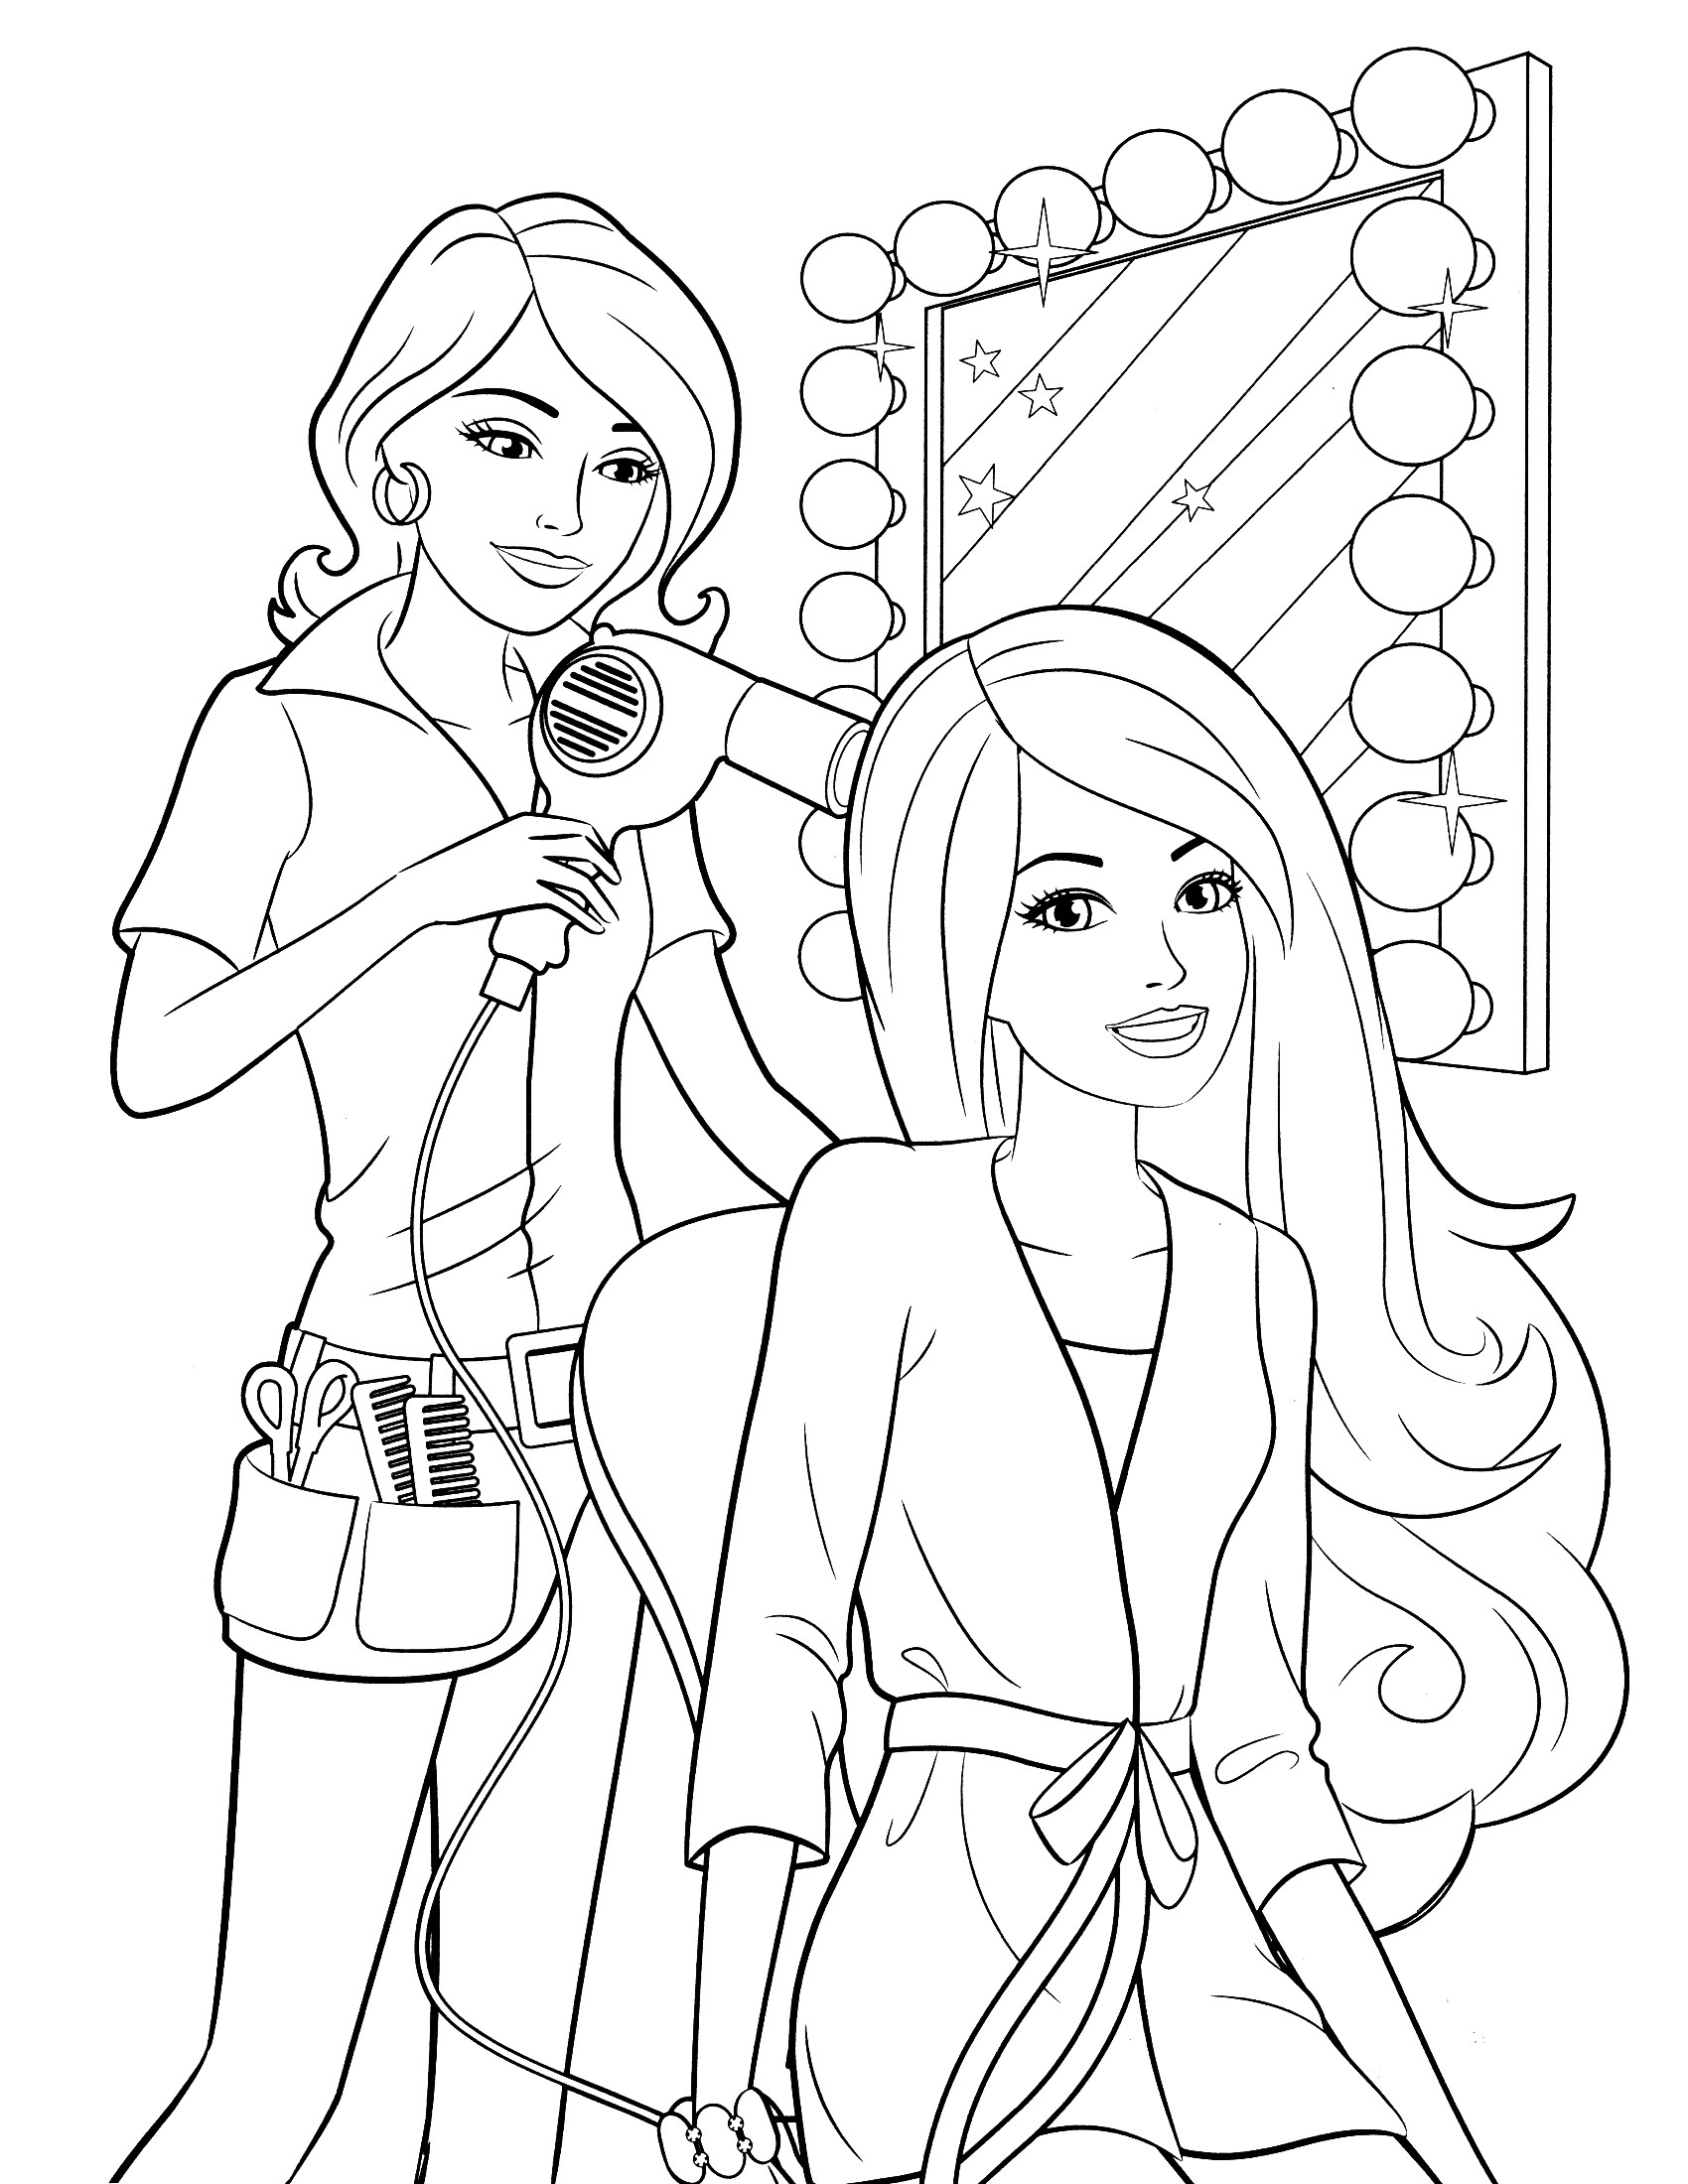 Free Printable Girls Coloring Pages
 Coloring Pages for Girls Best Coloring Pages For Kids